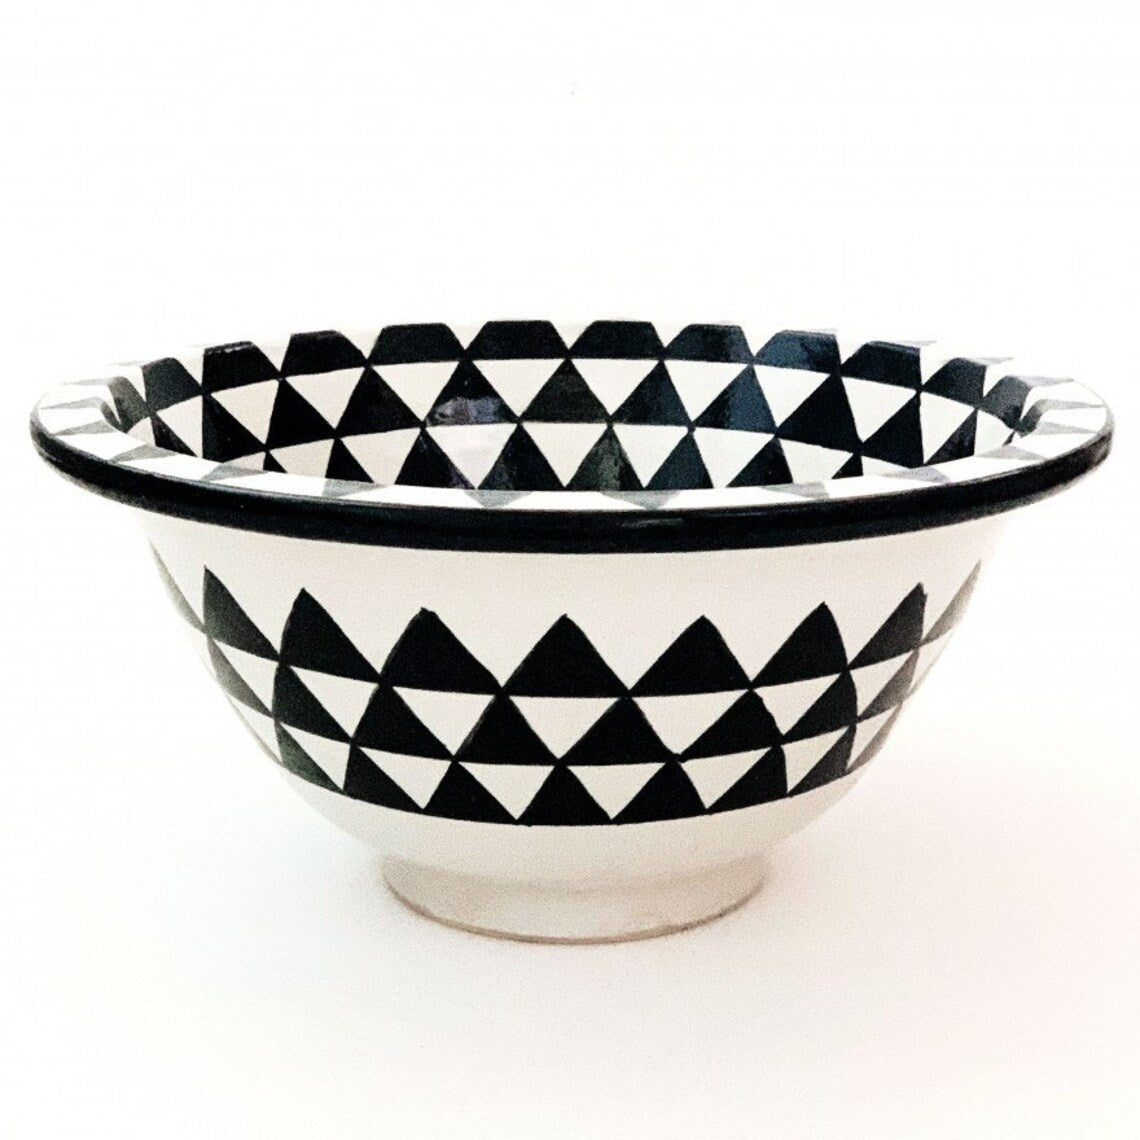 Moroccan sink | moroccan ceramic sink | bathroom sink | moroccan bathroom basin | moroccan sink bowl | black and white sink bowl #37